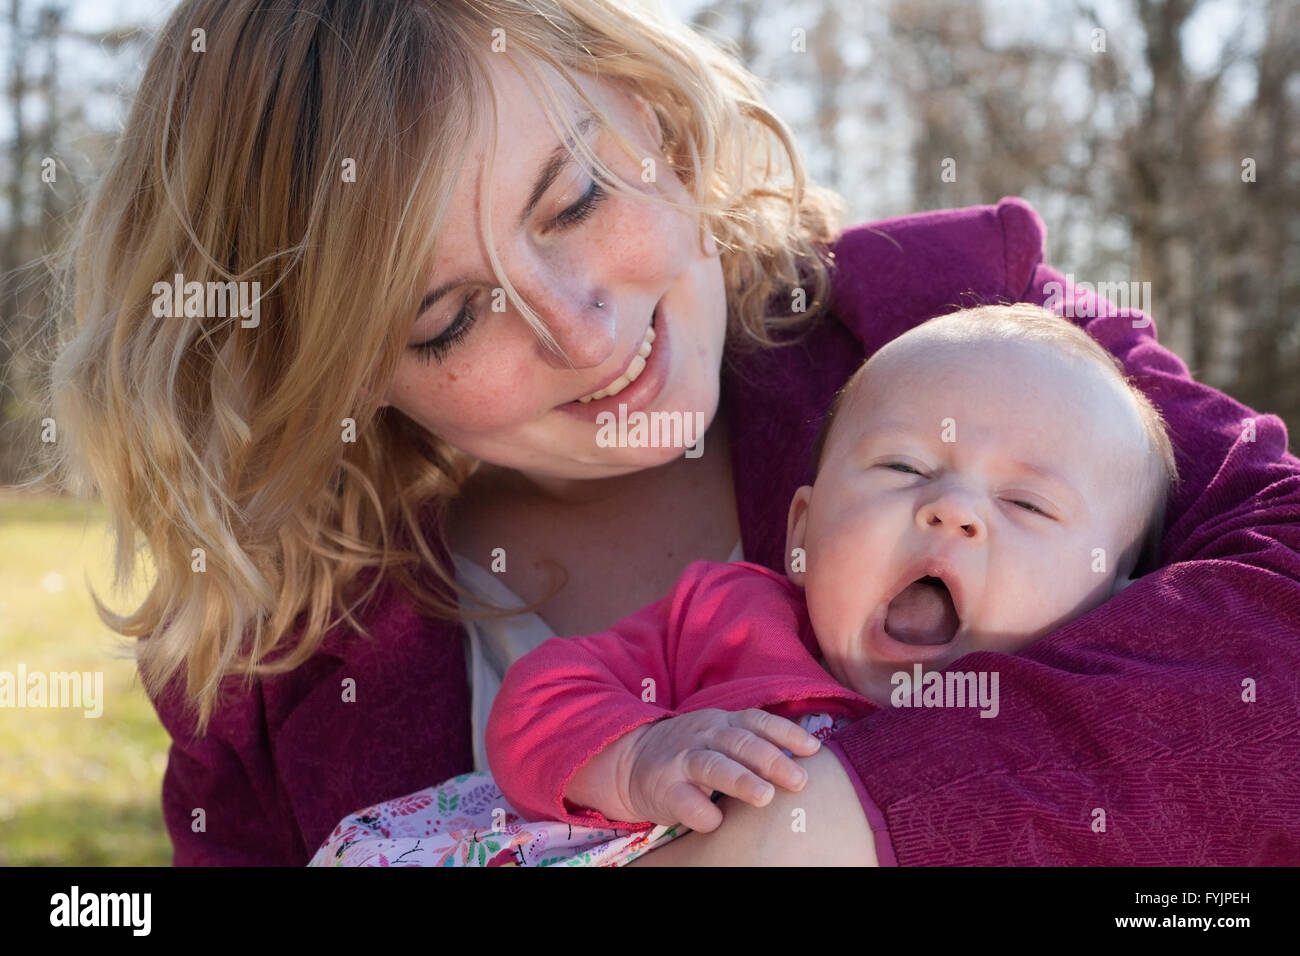 Baby is yawning in mothers arms Stock Photo